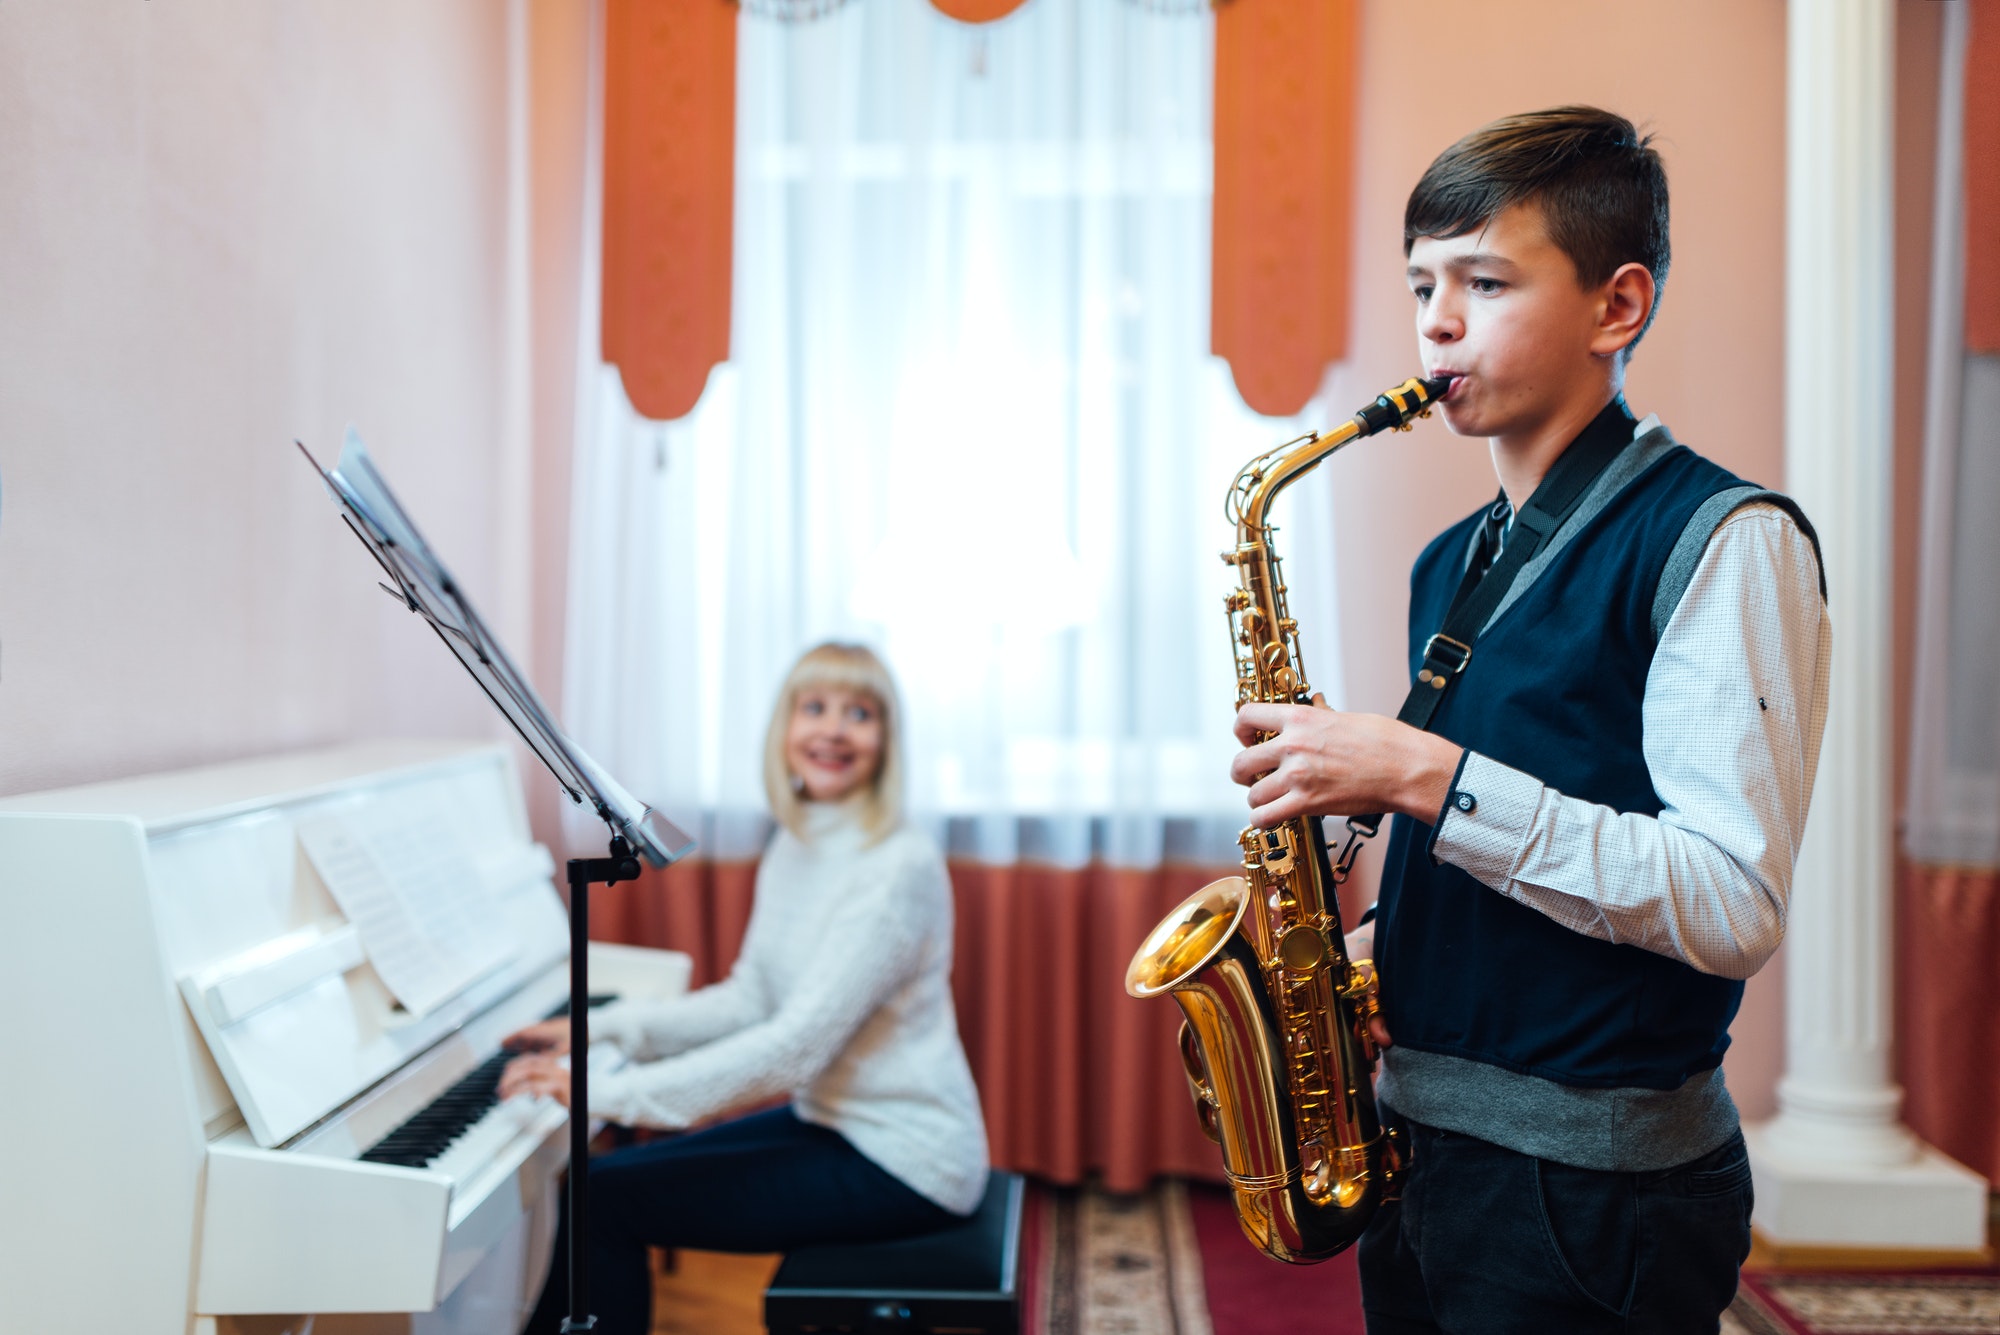 boy-learns-to-play-the-saxophone-in-a-music-lesson.jpg